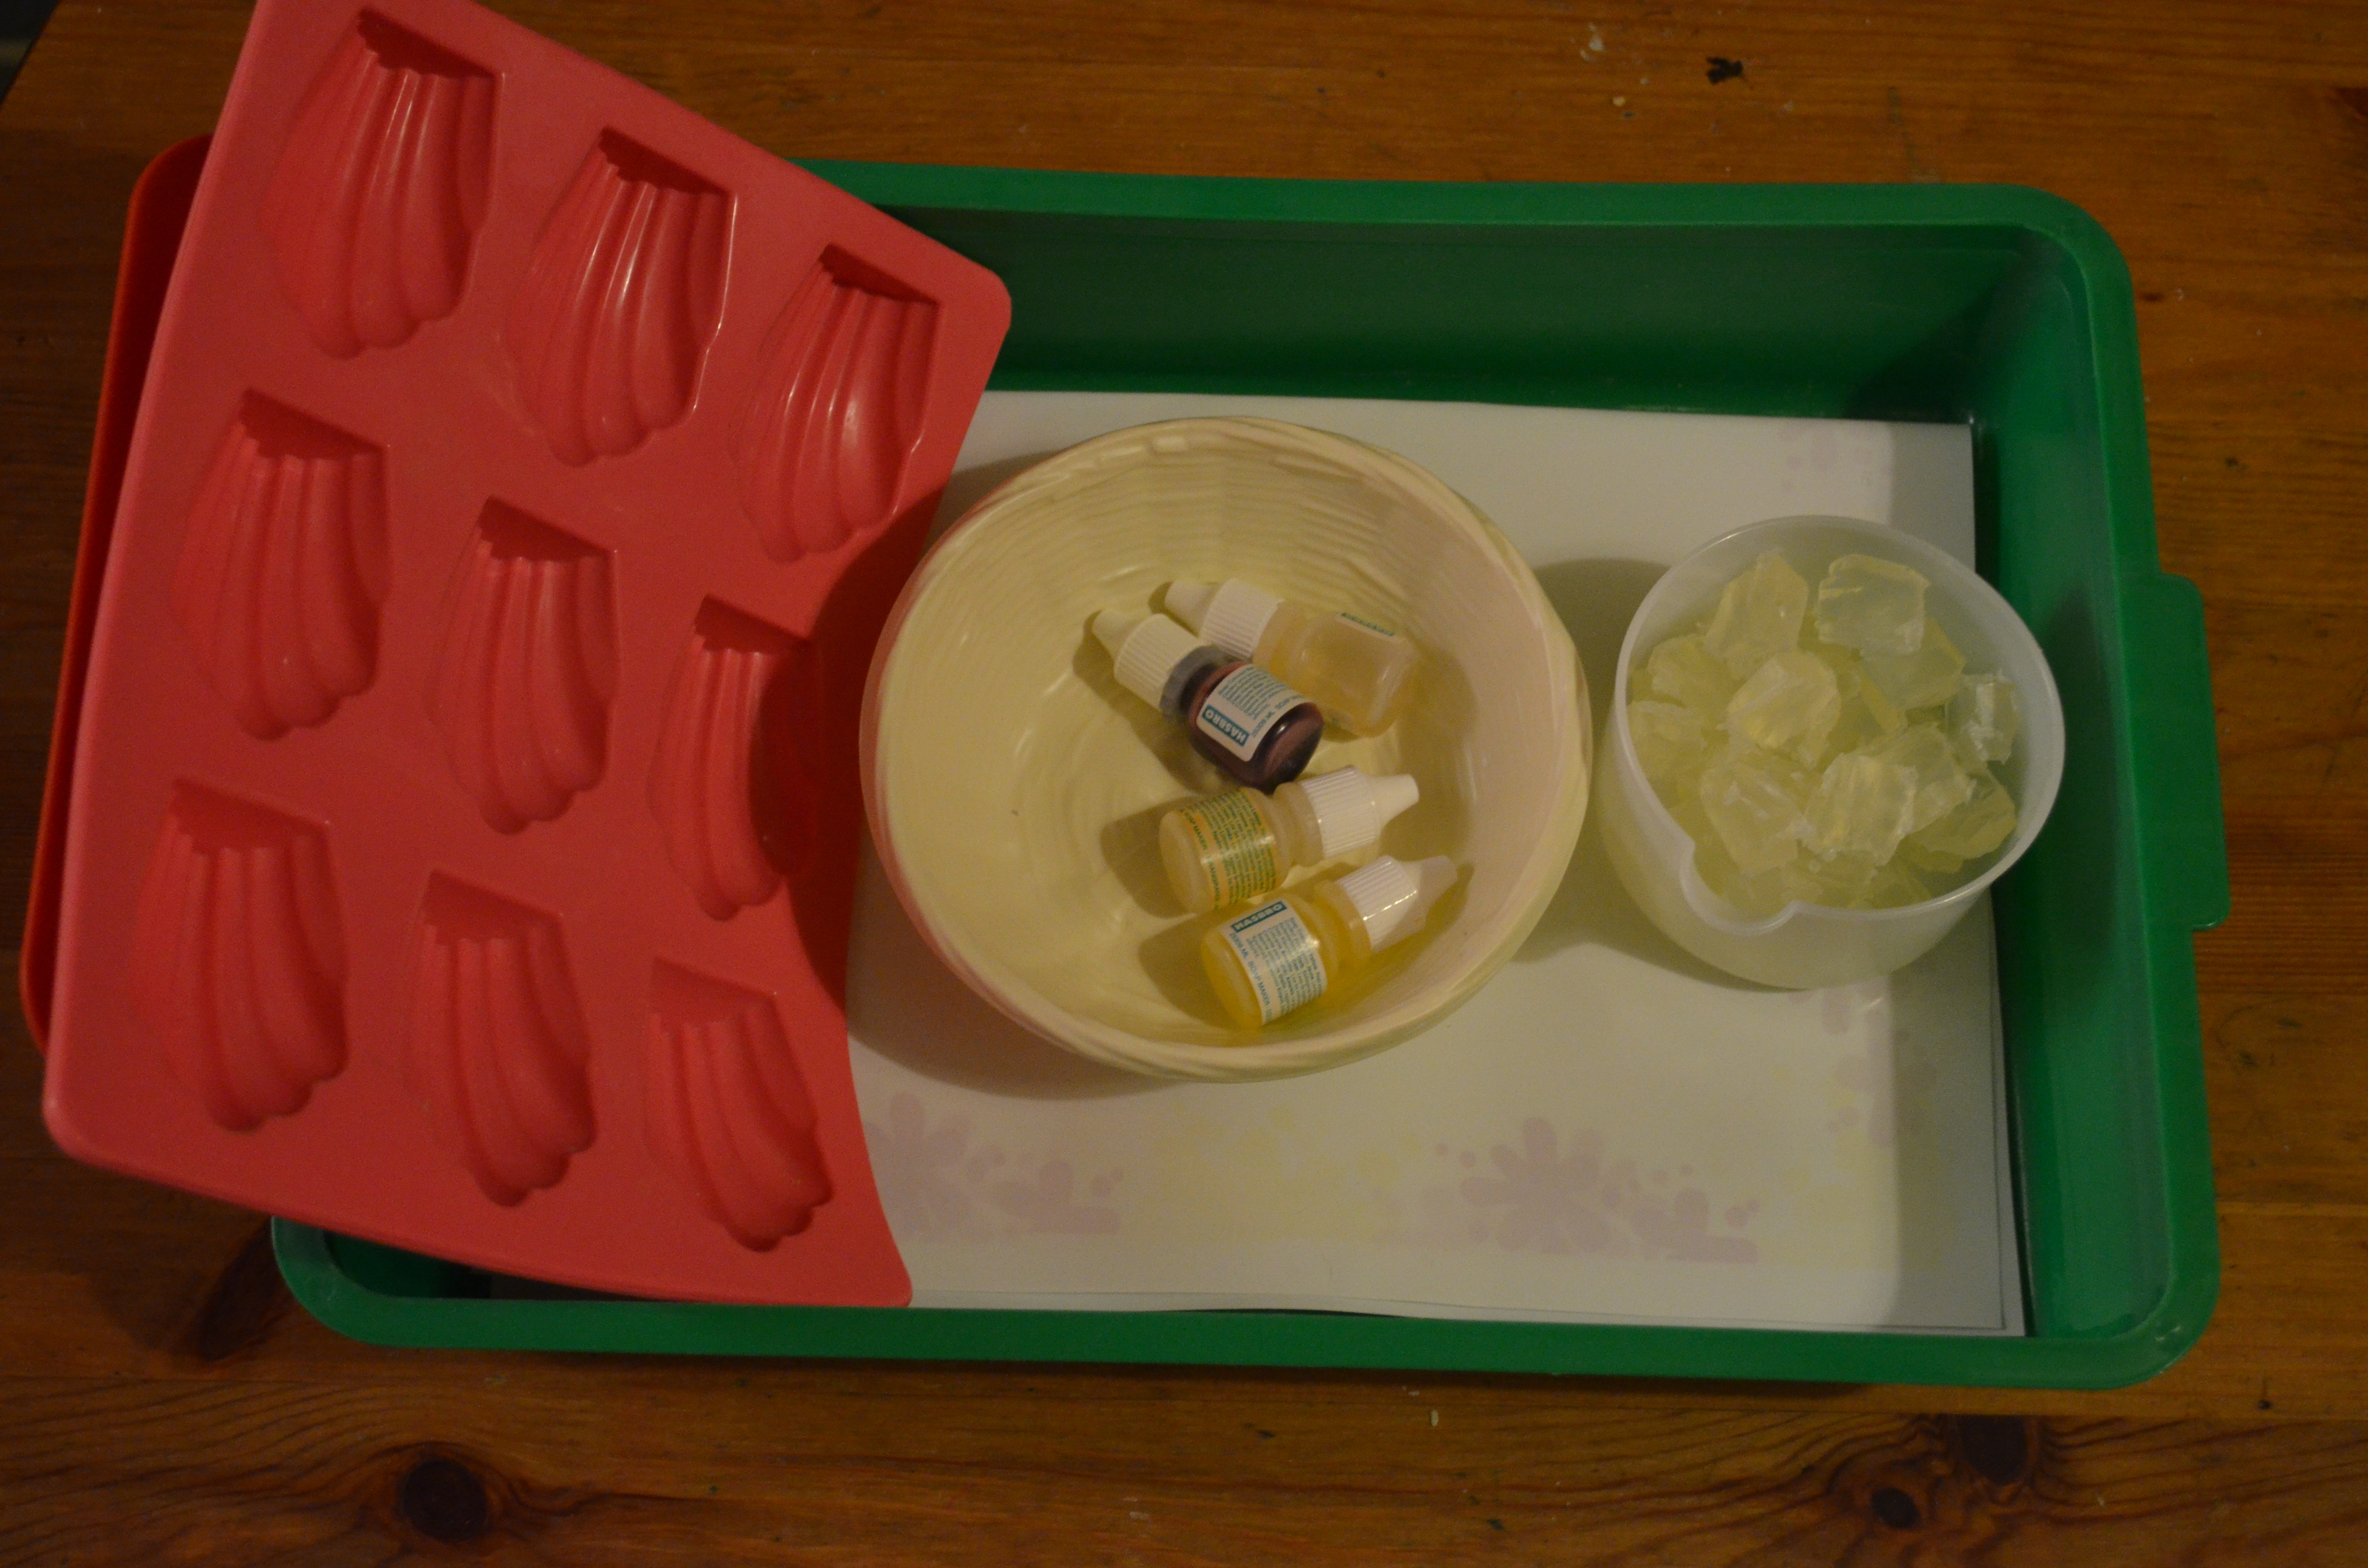 Cut up soap bits to melt in hot water, a basket of dyes and scents and shell and star shaped molds